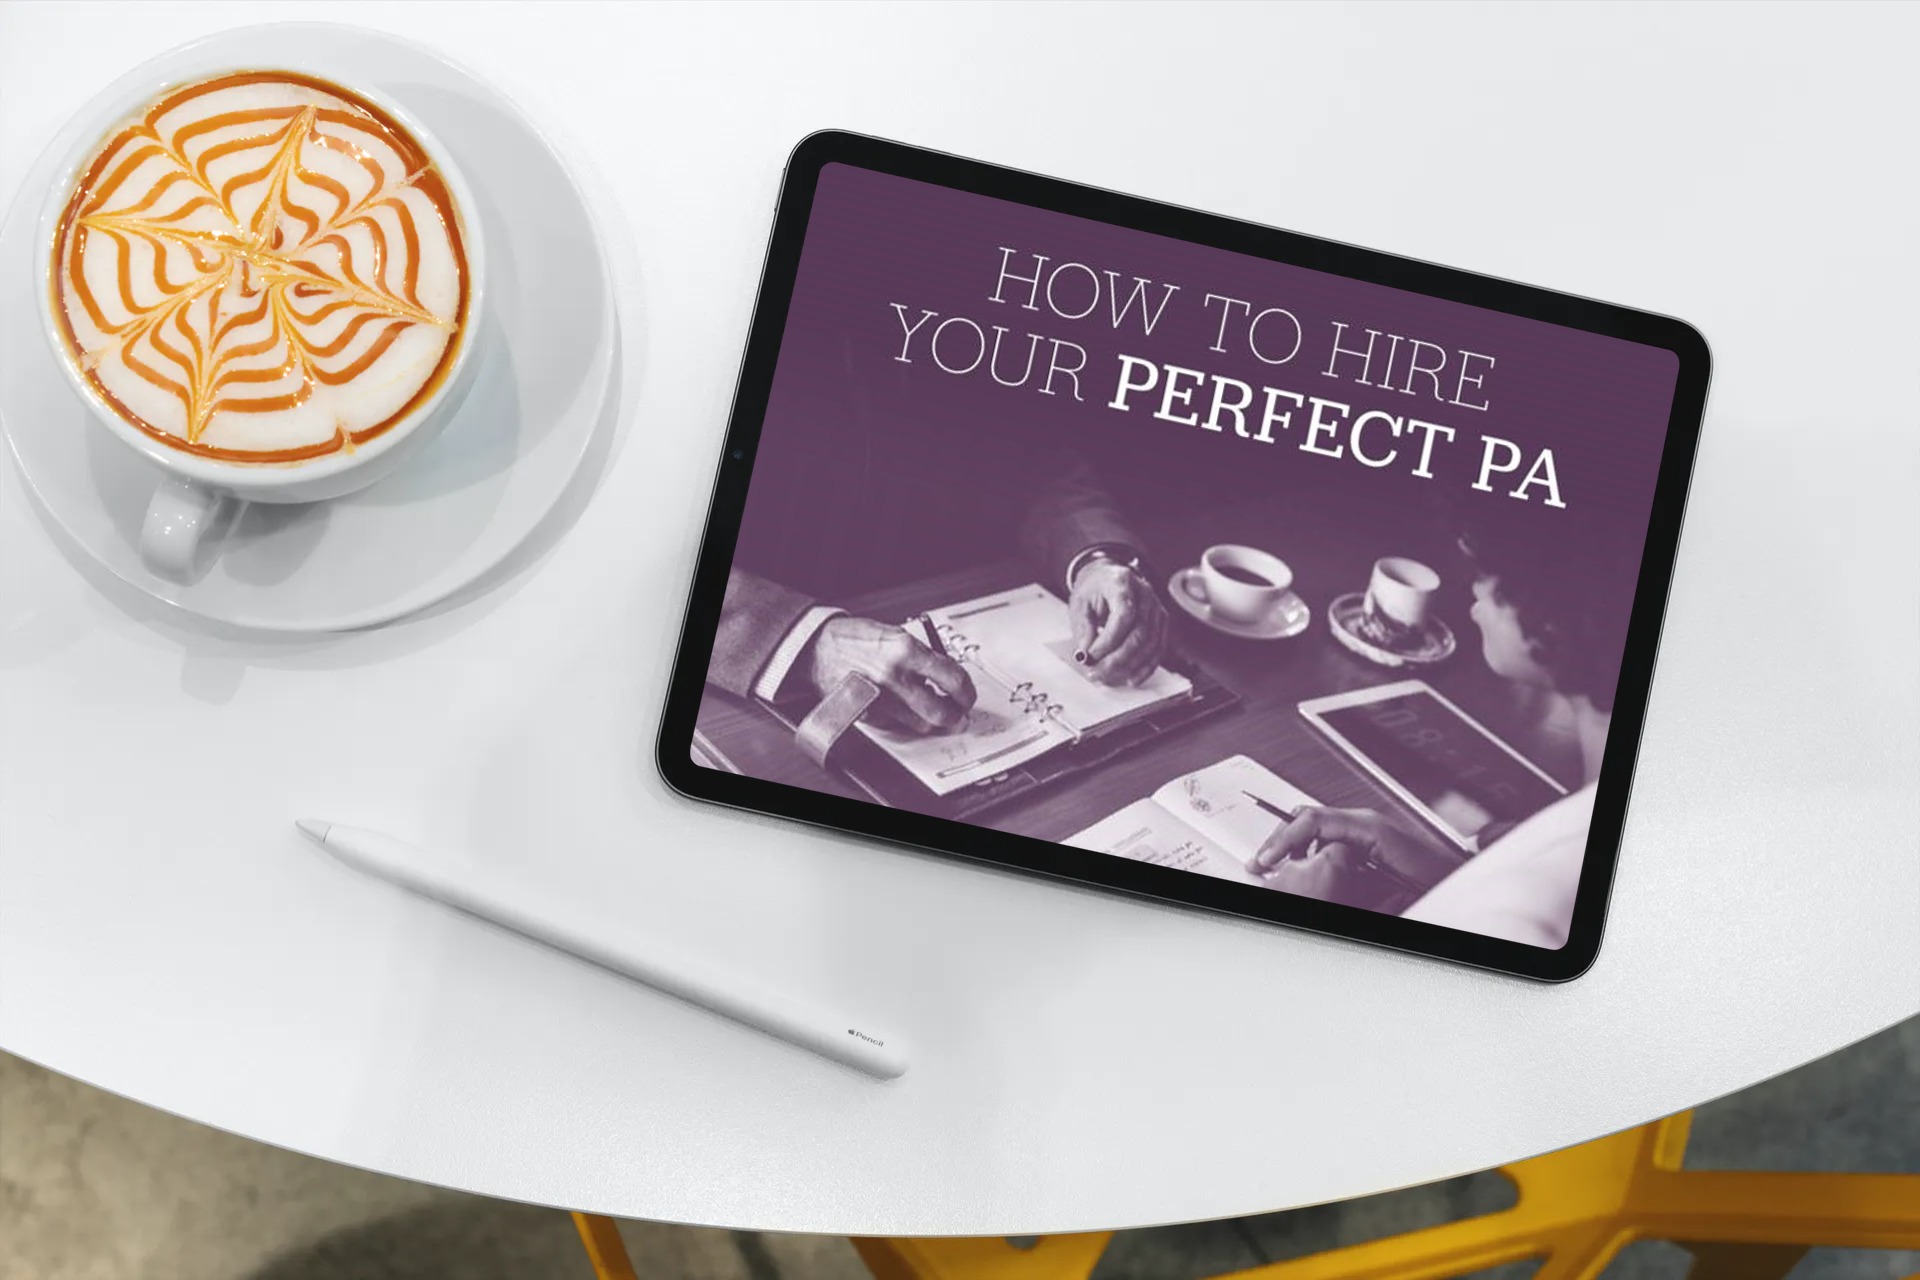 How to Hire Your Perfect PA